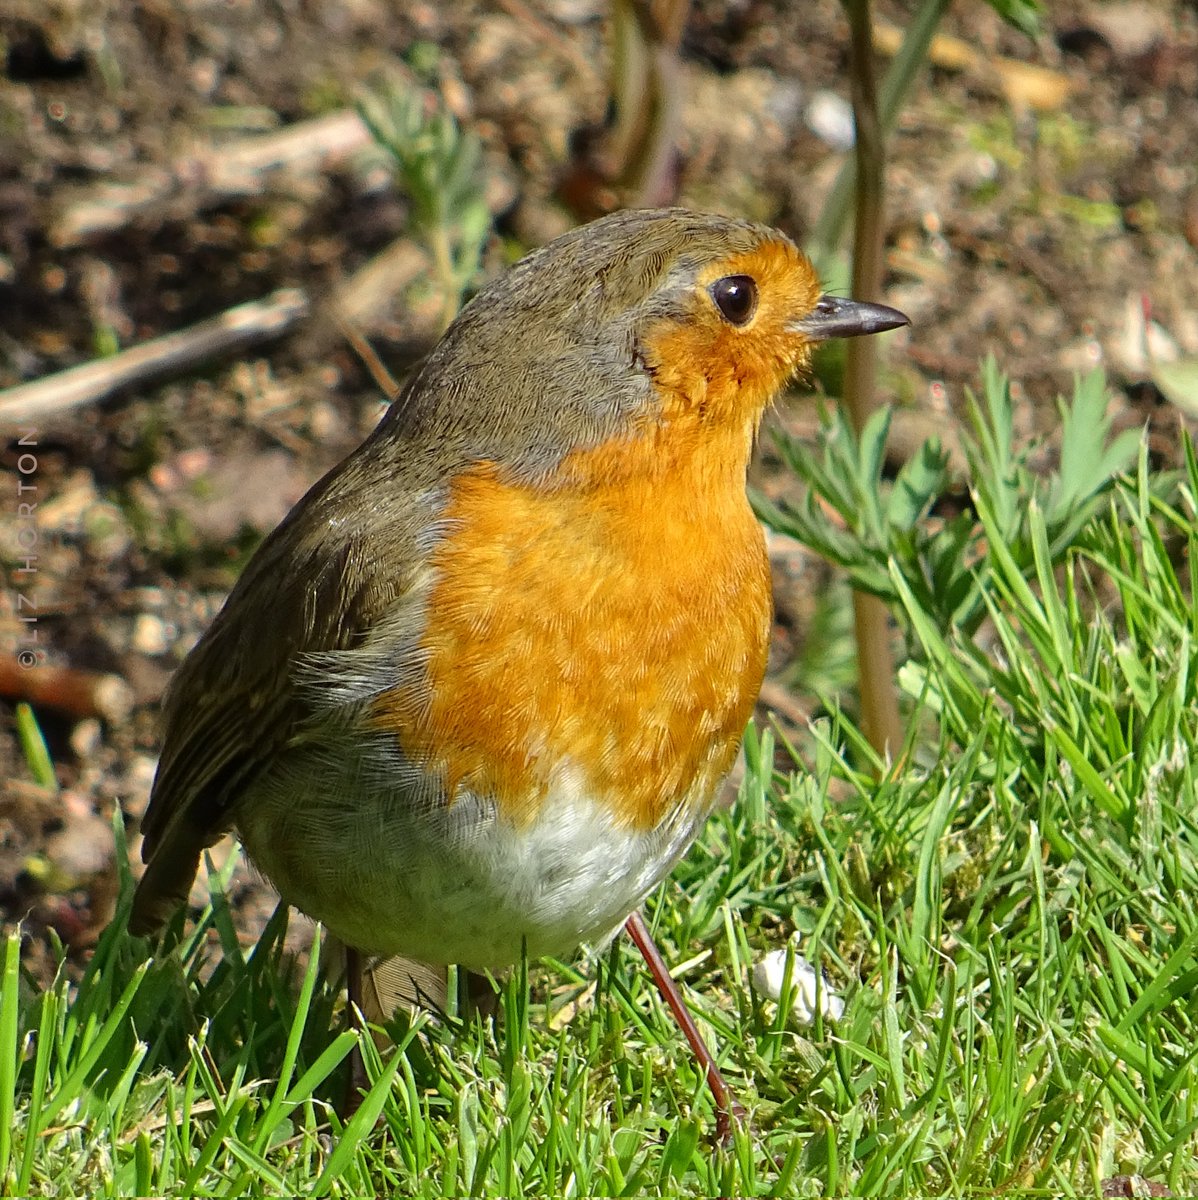 With a little #robin 🥰 around..
It's a great day.
Hope you're having a great day too!
And have a lovely sunny week ahead.
#nature #wildlife #birds #photography
#birdwatching #birdphotography
#BirdTwitter #birdtonic
#art #naturelovers .. 🌱🧡🕊